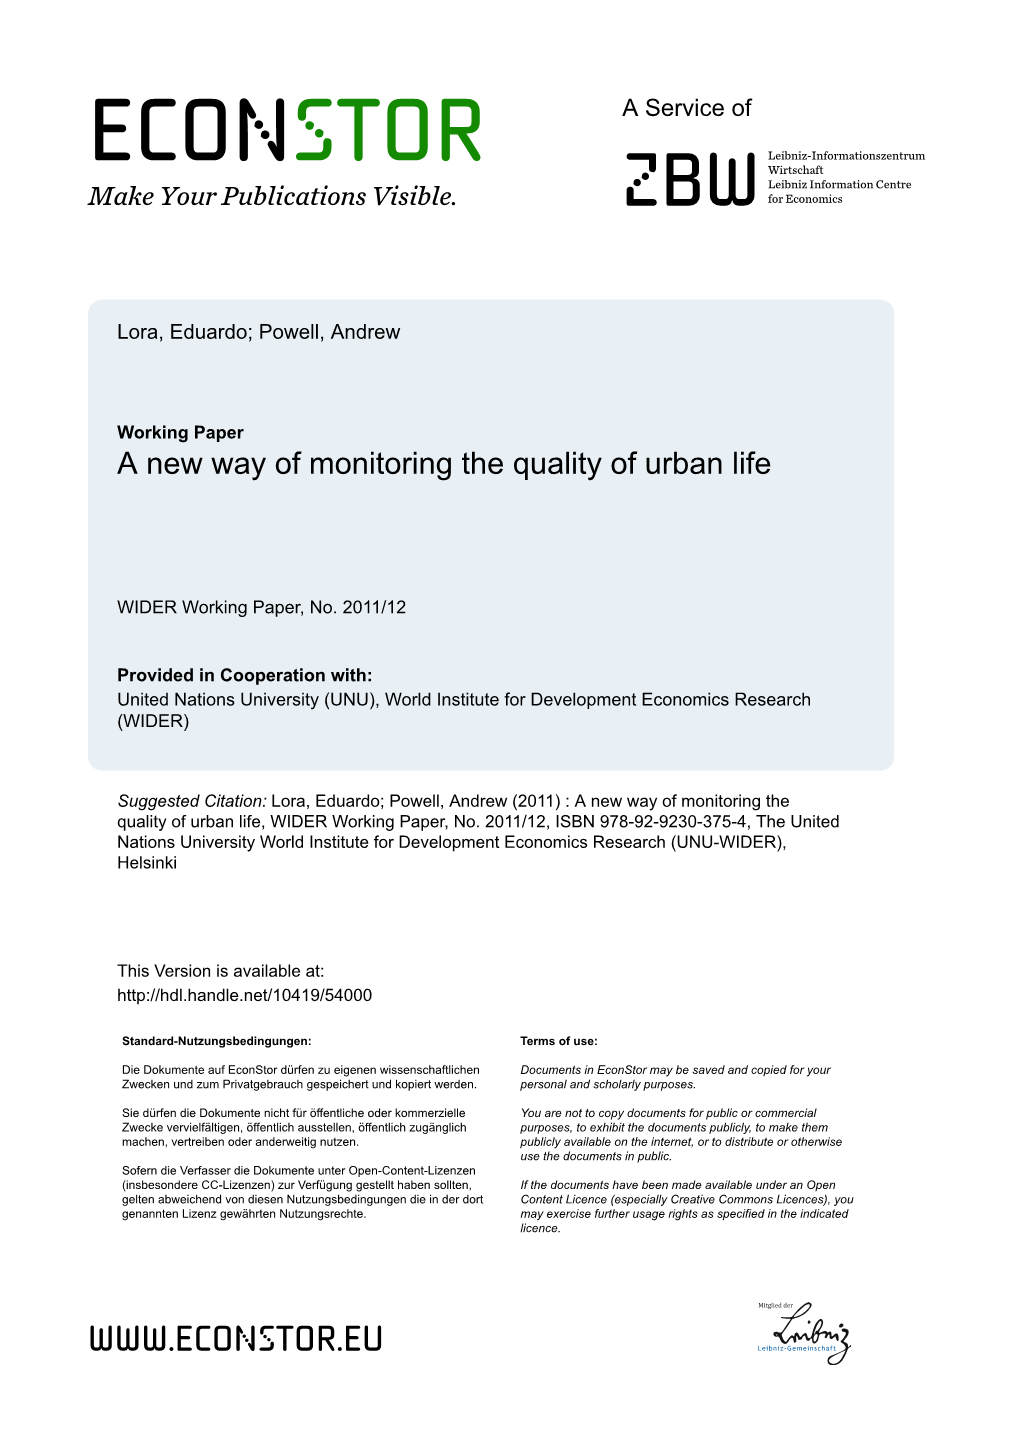 WIDER Working Paper No. 2011/12 a New Way of Monitoring the Quality